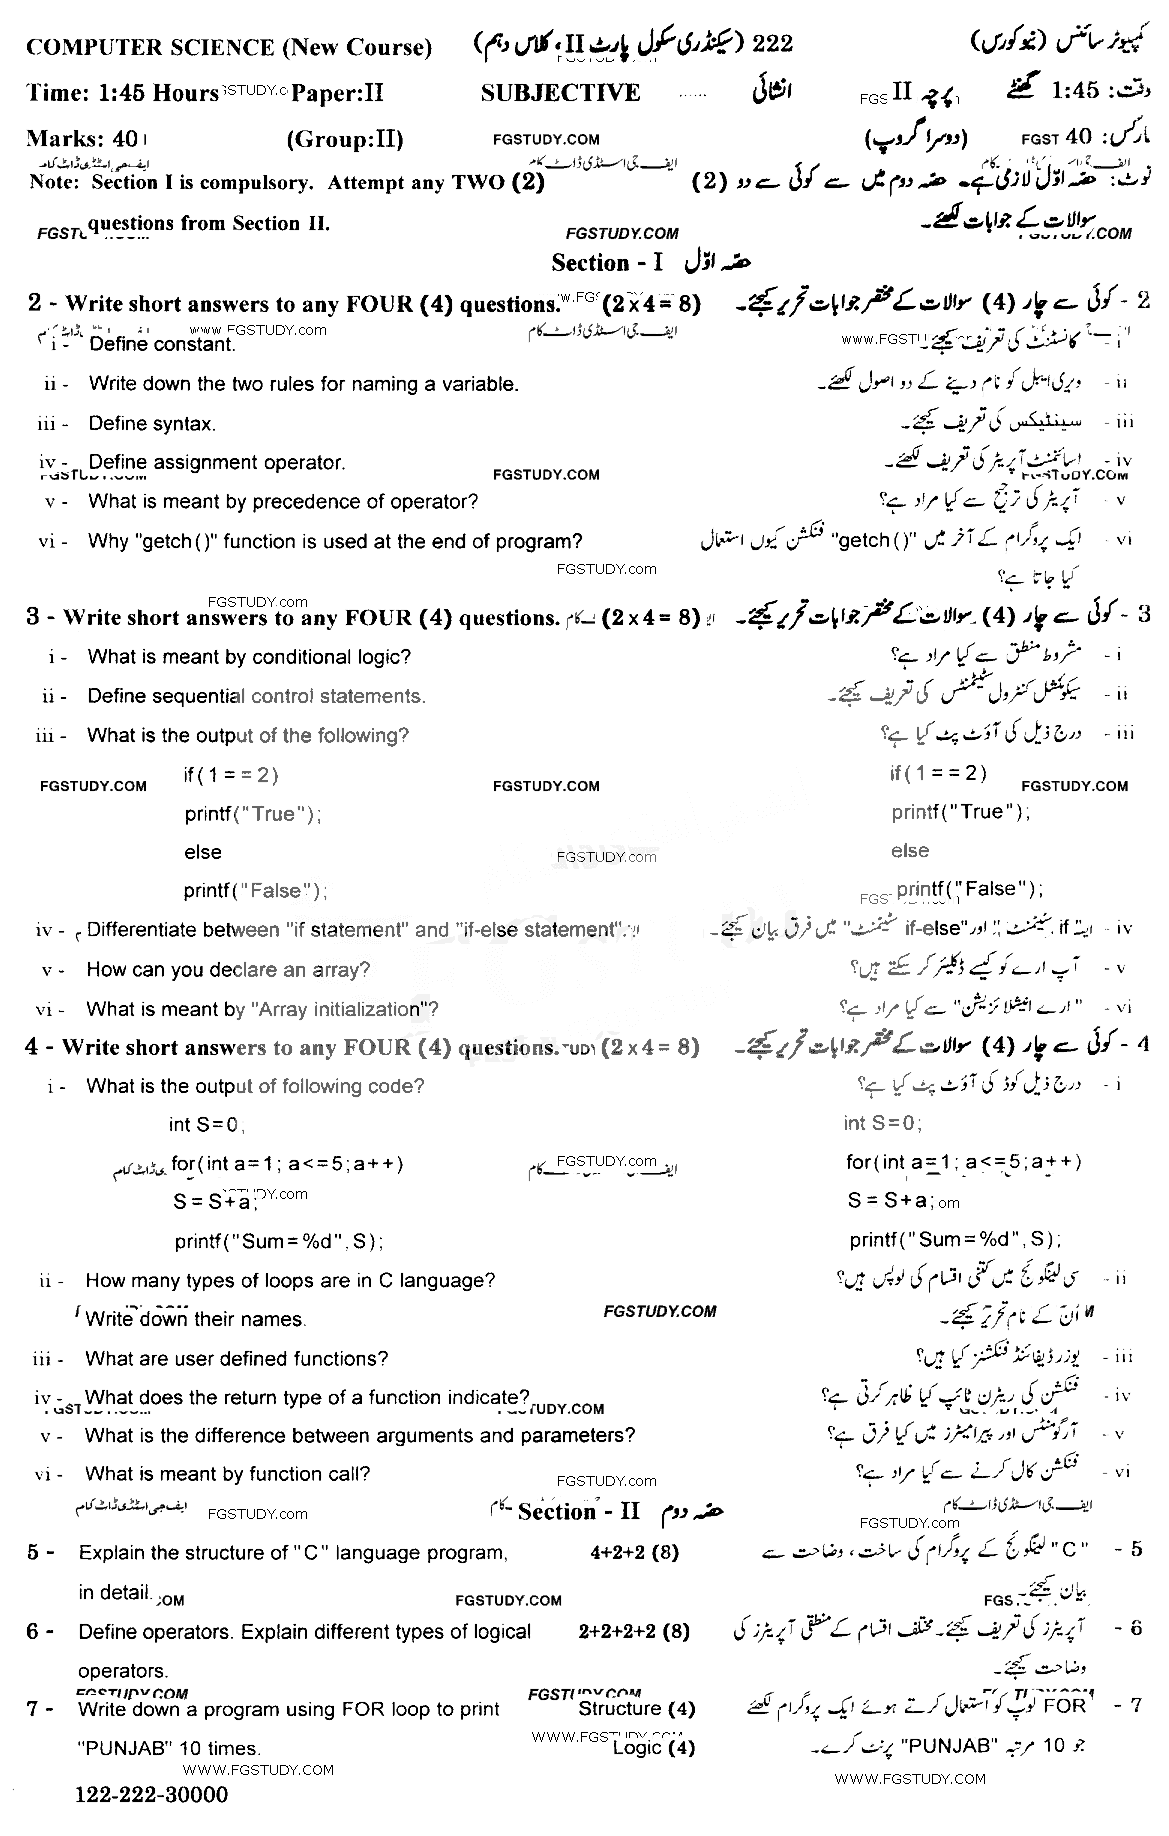 10th Class Computer Science Past Paper 2022 Gujranwala Board Group 2 Subjective